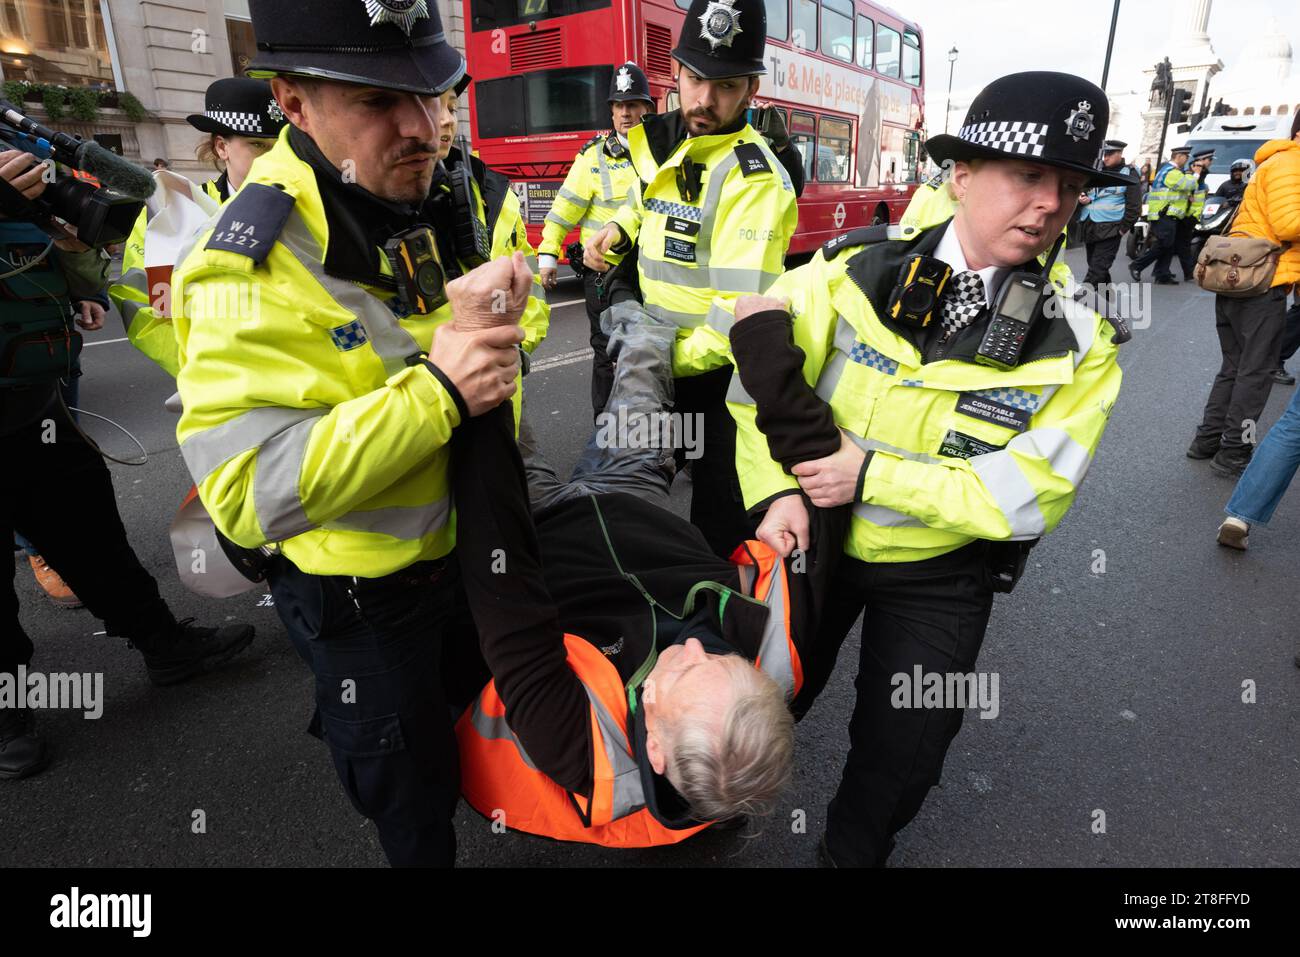 London, UK. 20 November, 2023. Climate activists from Just Stop Oil gather in Trafalgar Square before attempting to slow march down Whitehall demanding an end to new fossil fuel extraction licences amidst a climate emergency. Police rapidly issued a Section 7 notice, arresting those who refused to leave the road under new anti-protest powers in the Public Order Act. Credit: Ron Fassbender/Alamy Live News Stock Photo